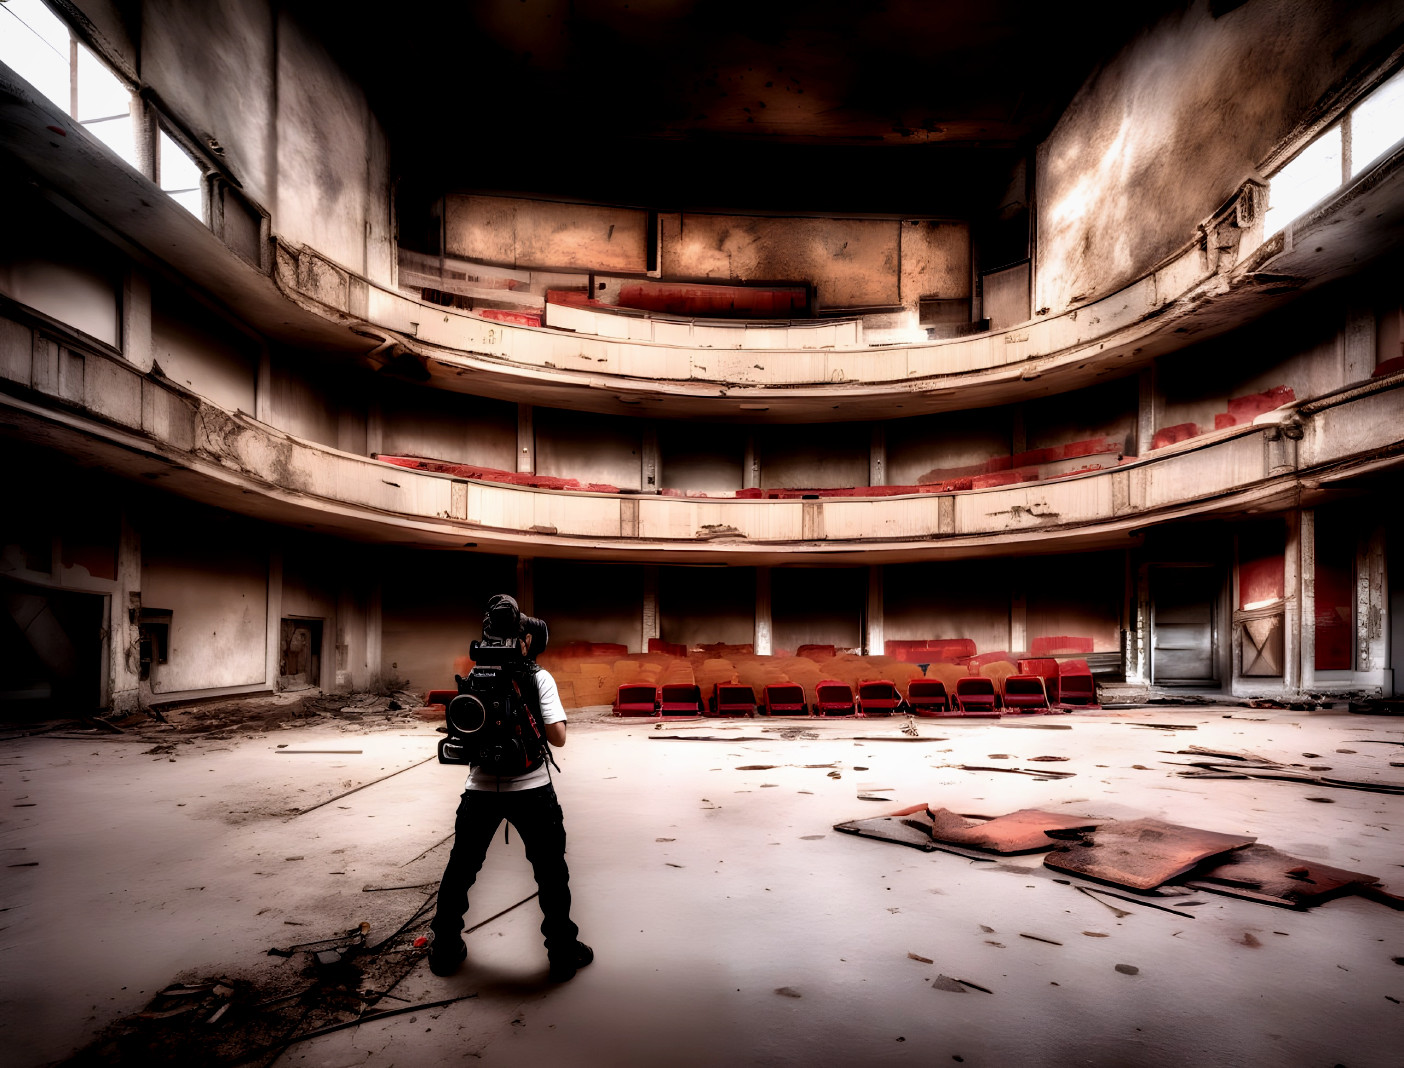 Photographer in dilapidated theater with red seats and peeling walls